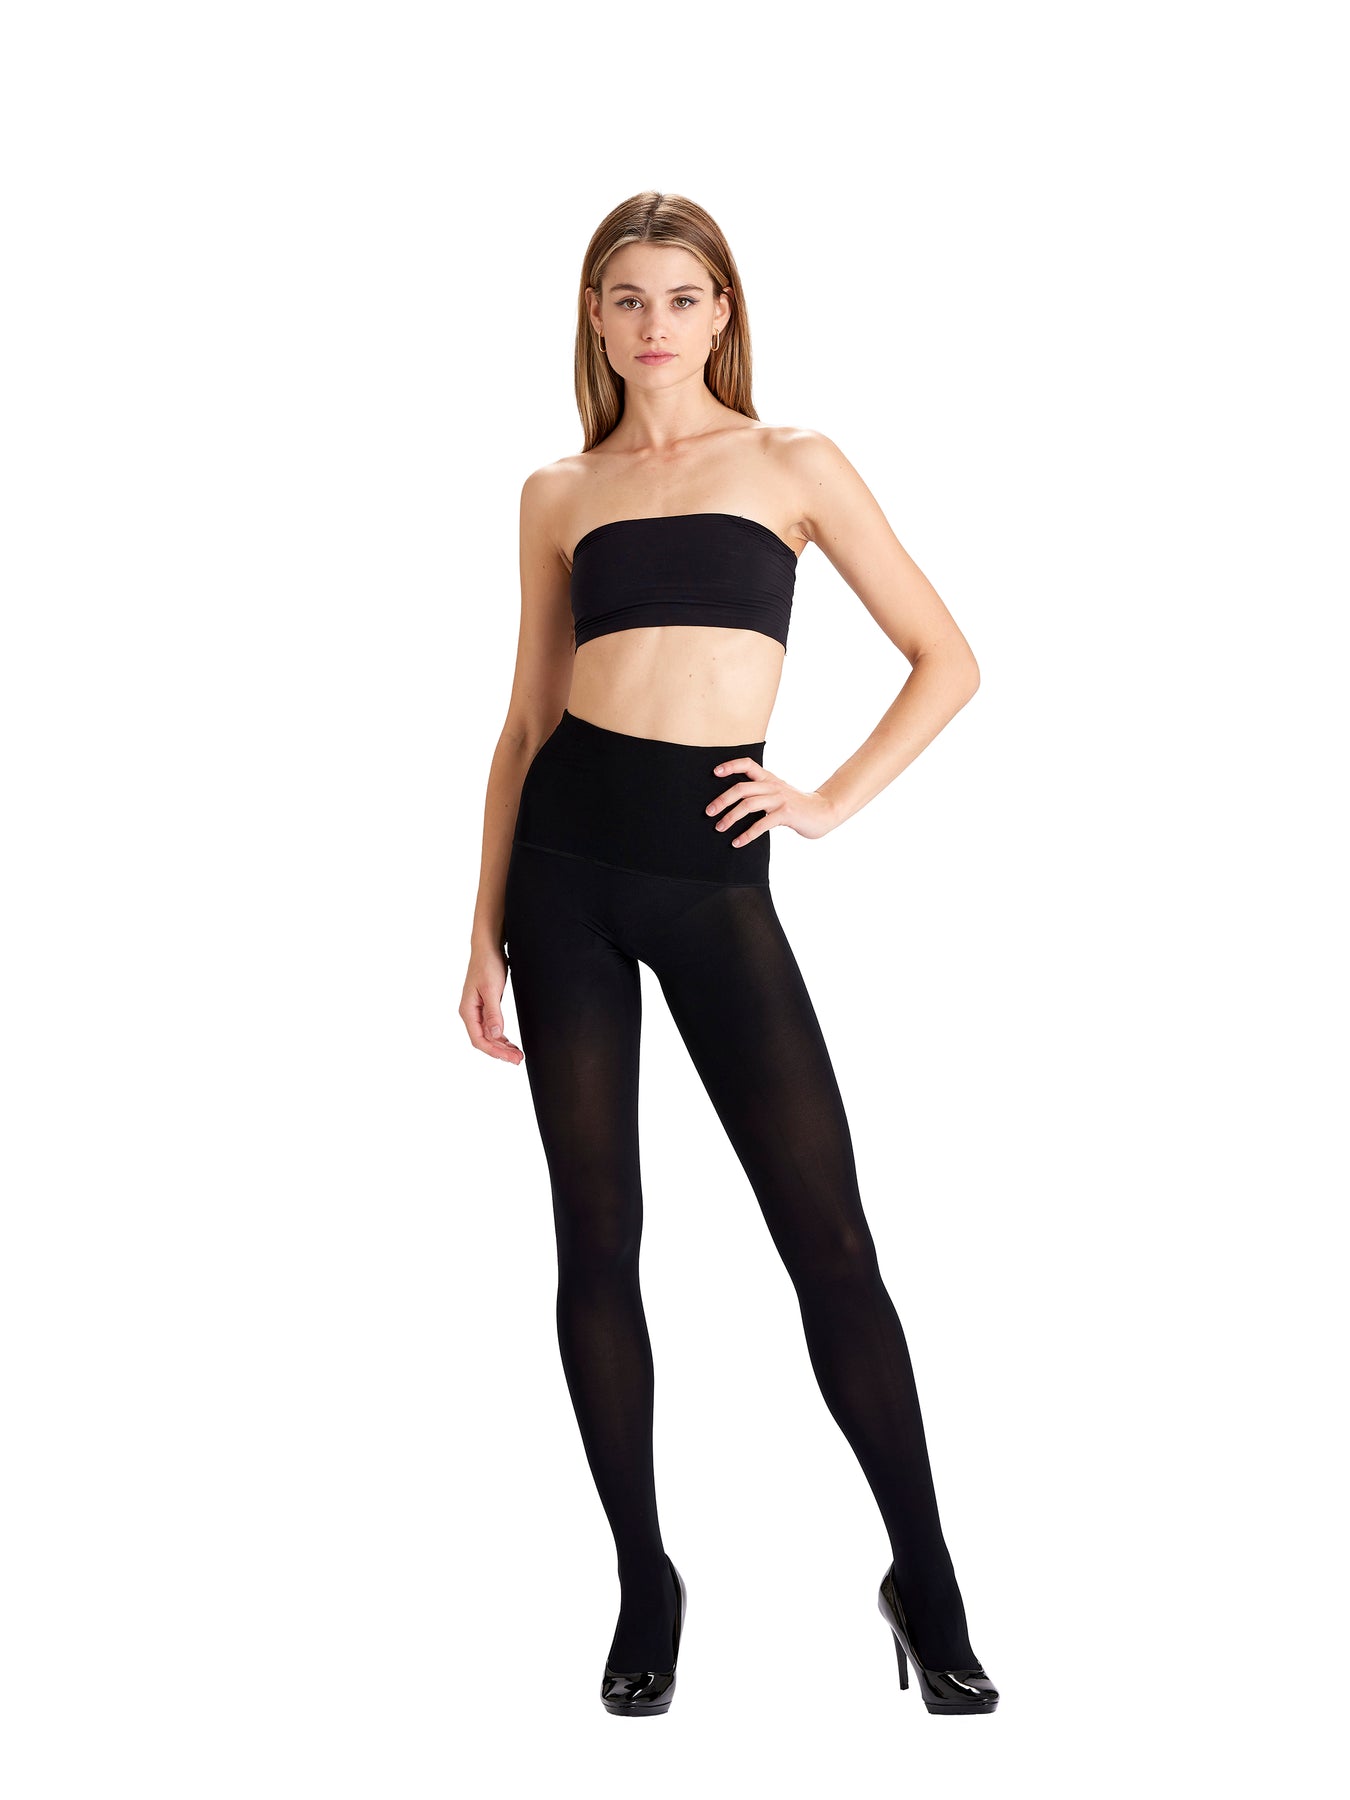 Tights for women  Everyday and Fashion Tights at – Simply Hosiery Online